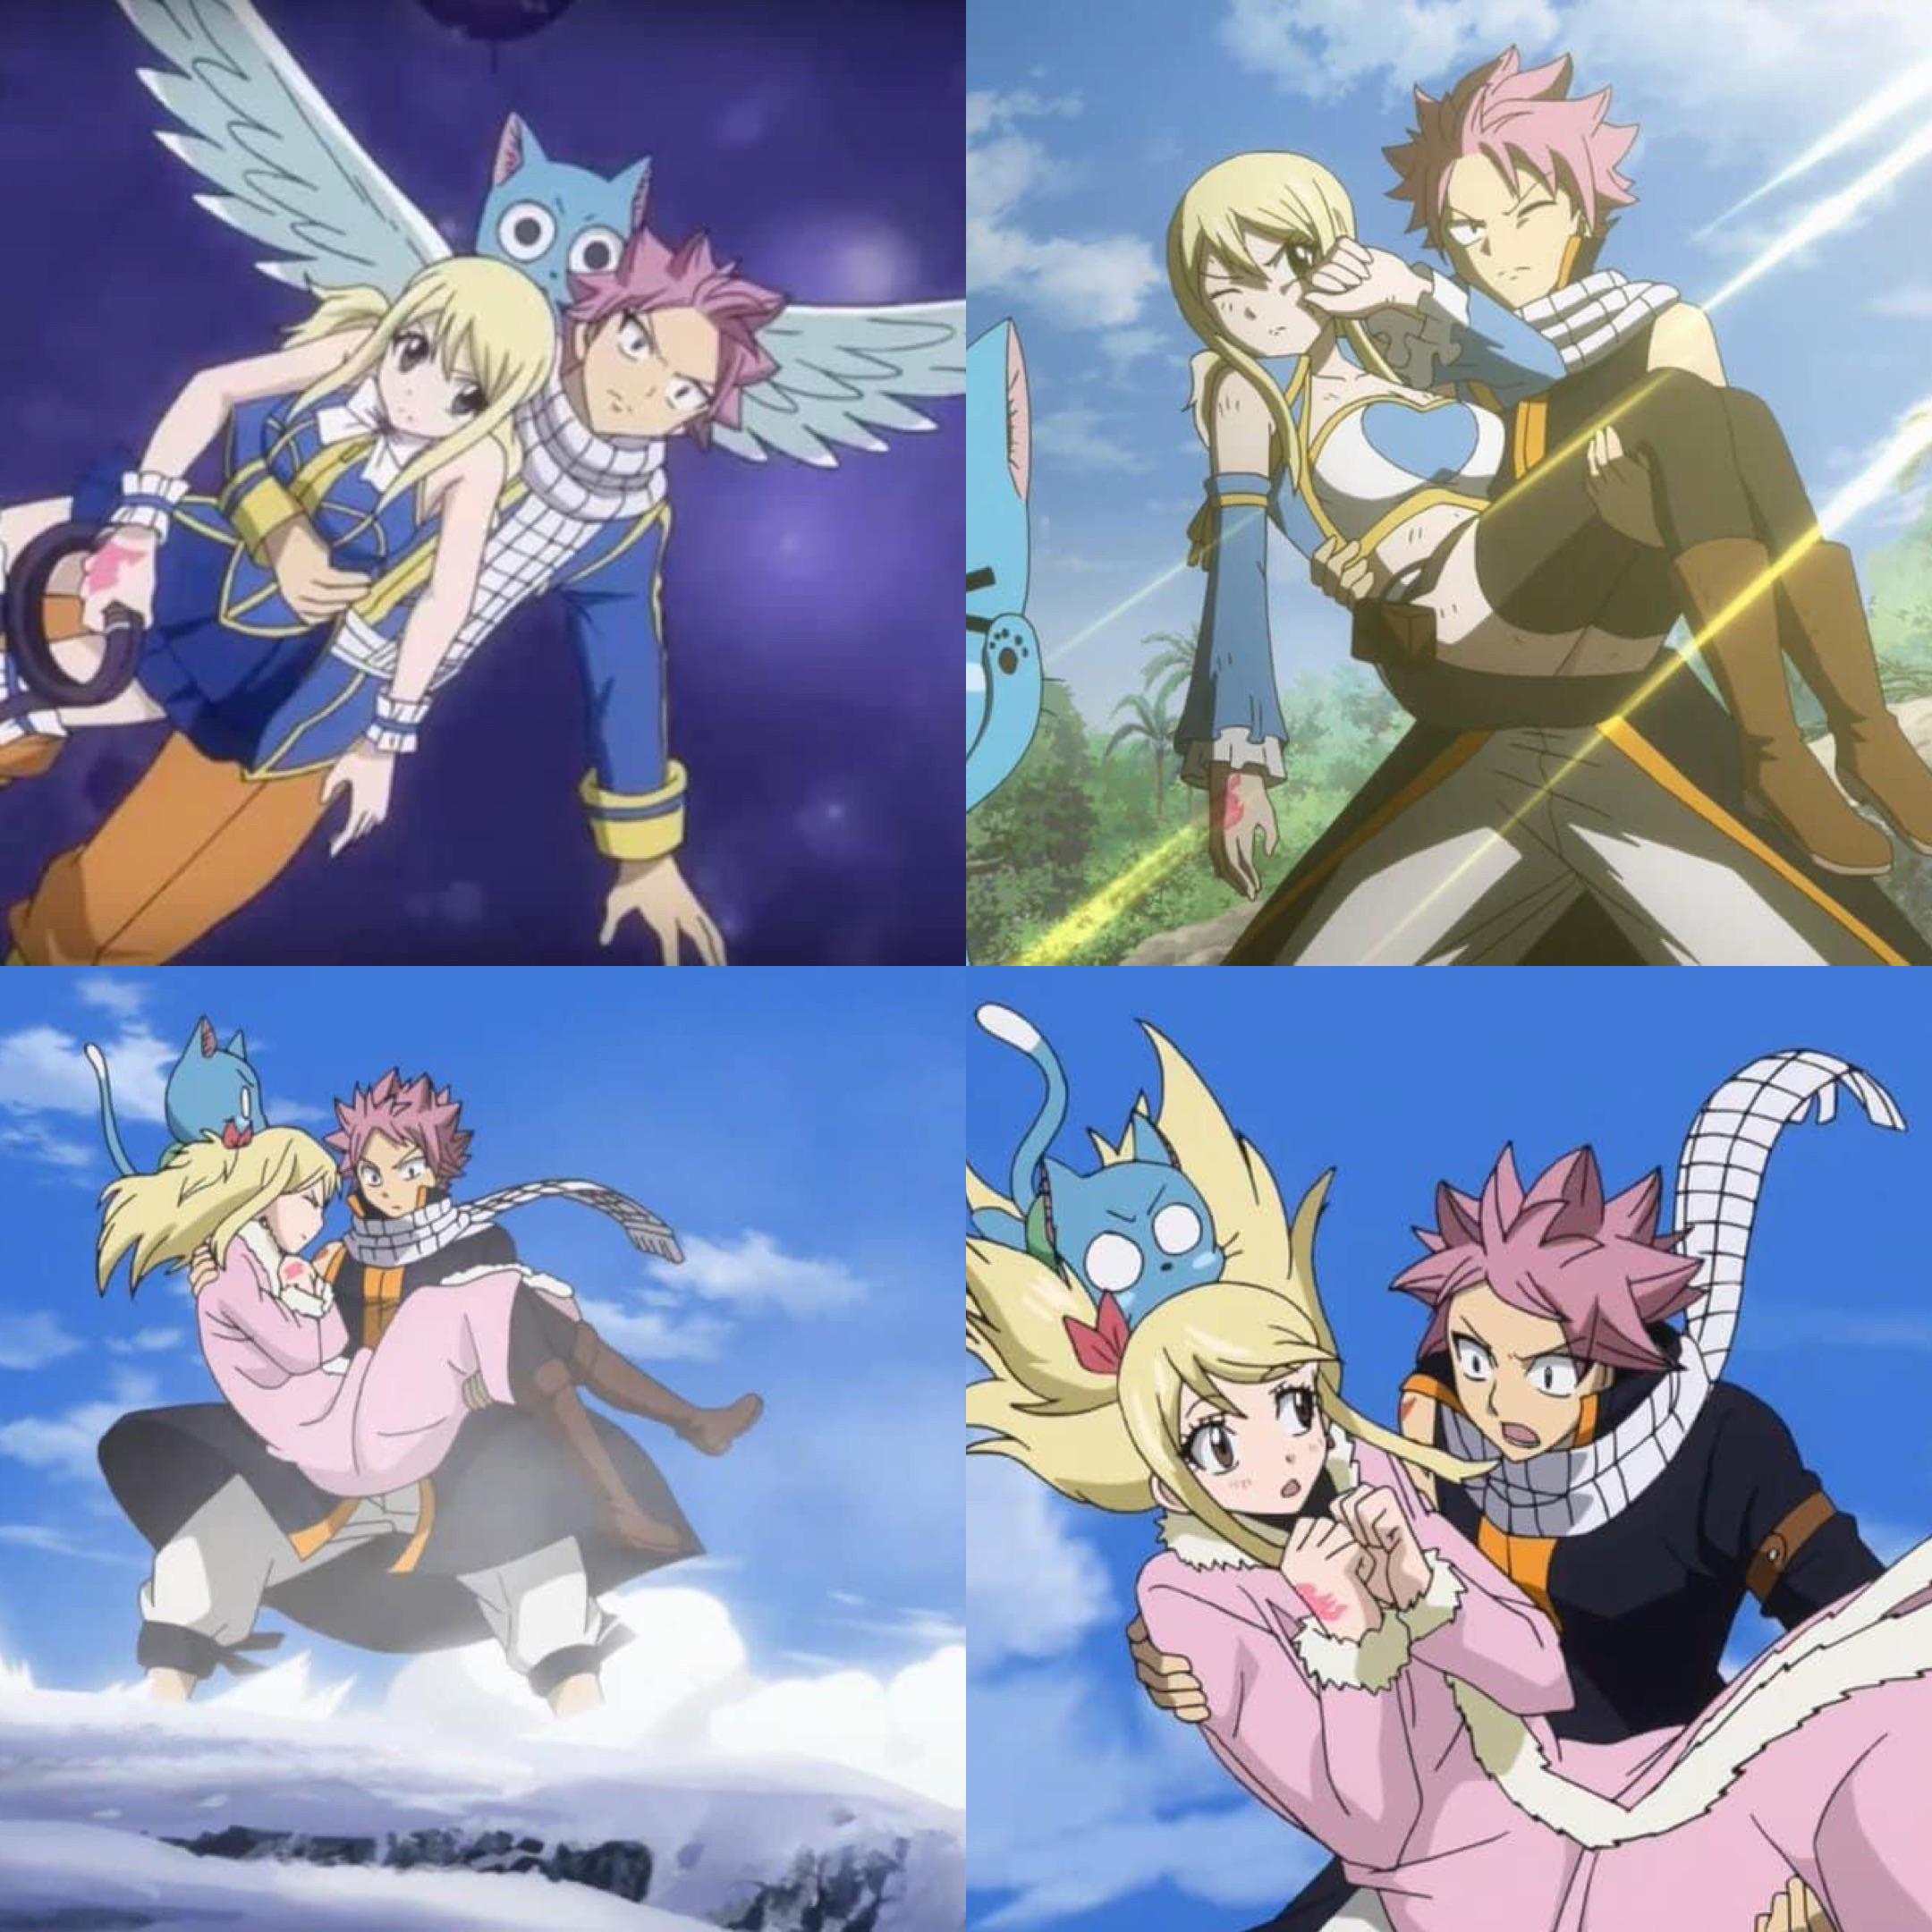 natsu and lucy